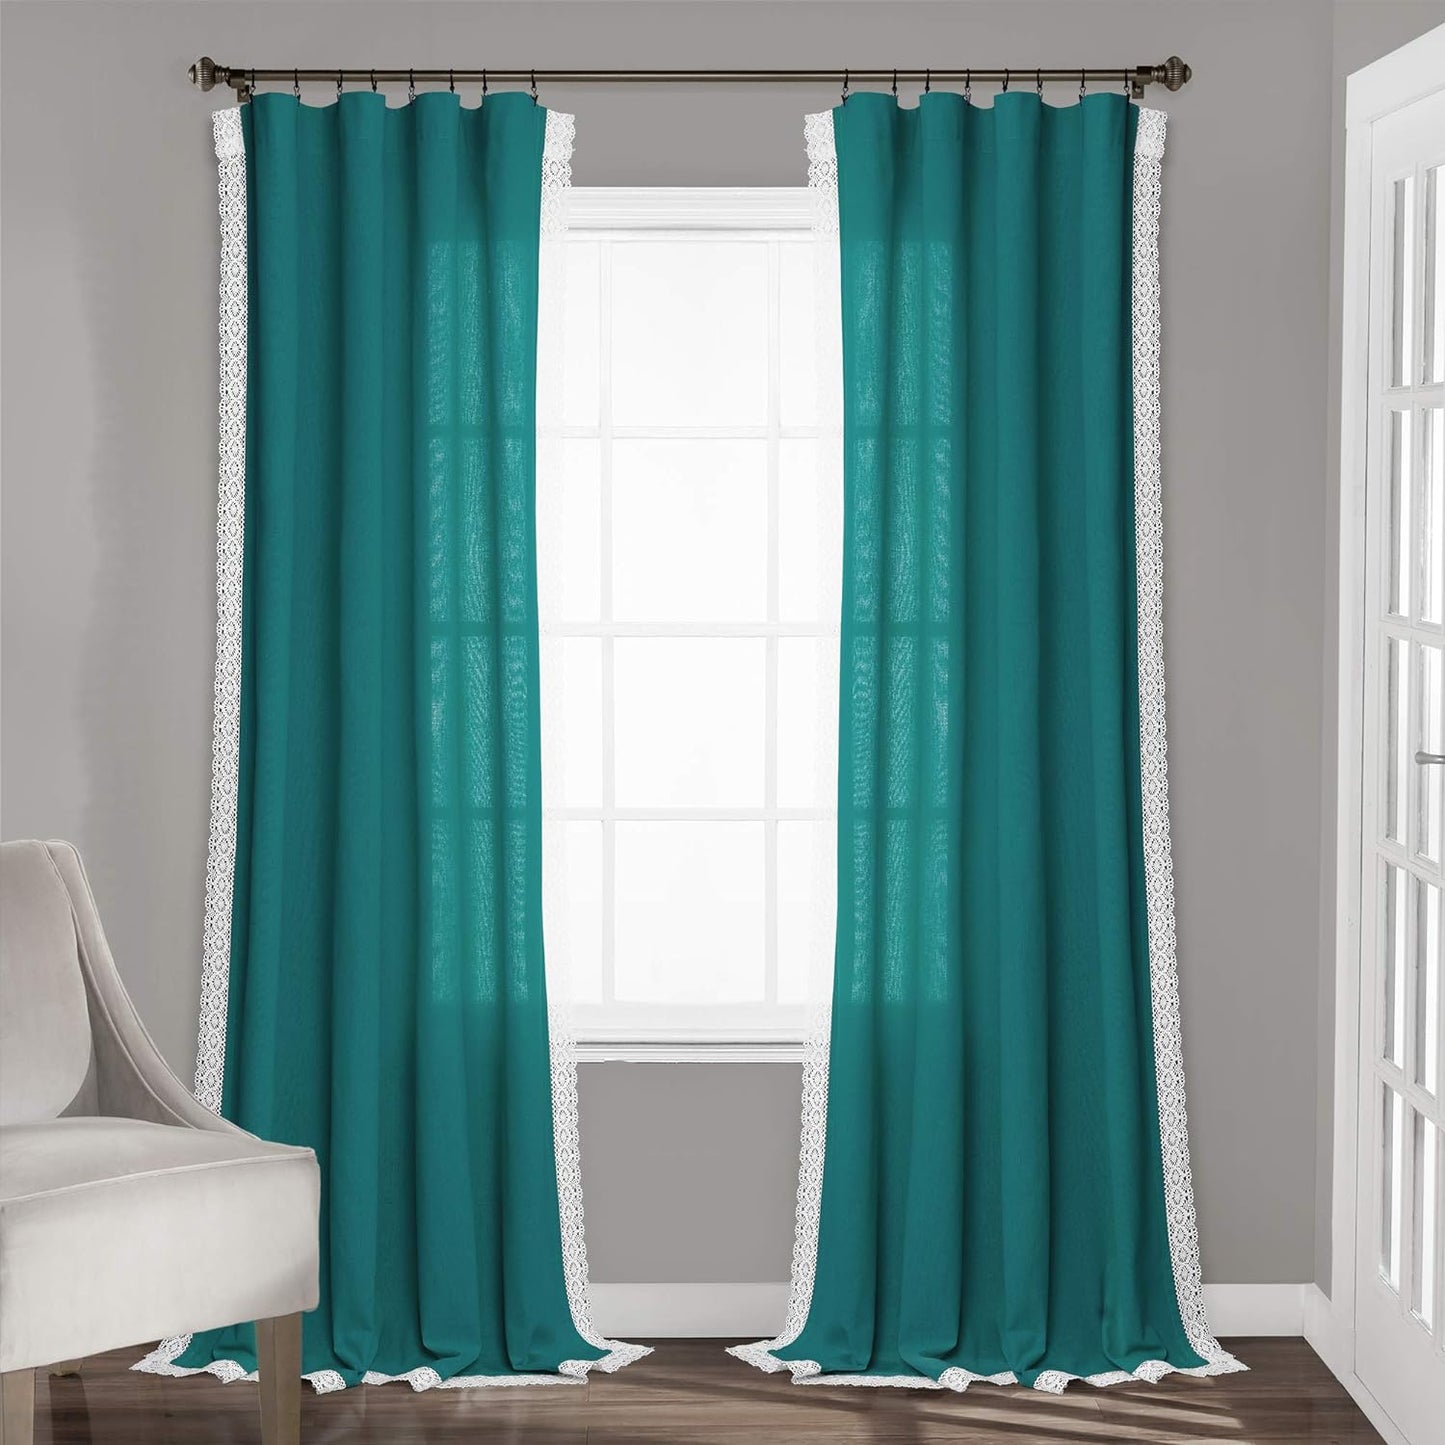 Lush Decor Rosalie Light Filtering Window Curtain Panel Set- Pair- Vintage Farmhouse & French Country Style Curtains - Timeless Dreamy Drape - Romantic Lace Trim - 54" W X 84" L, White  Triangle Home Fashions Turquoise Window Panel 54"W X 95"L